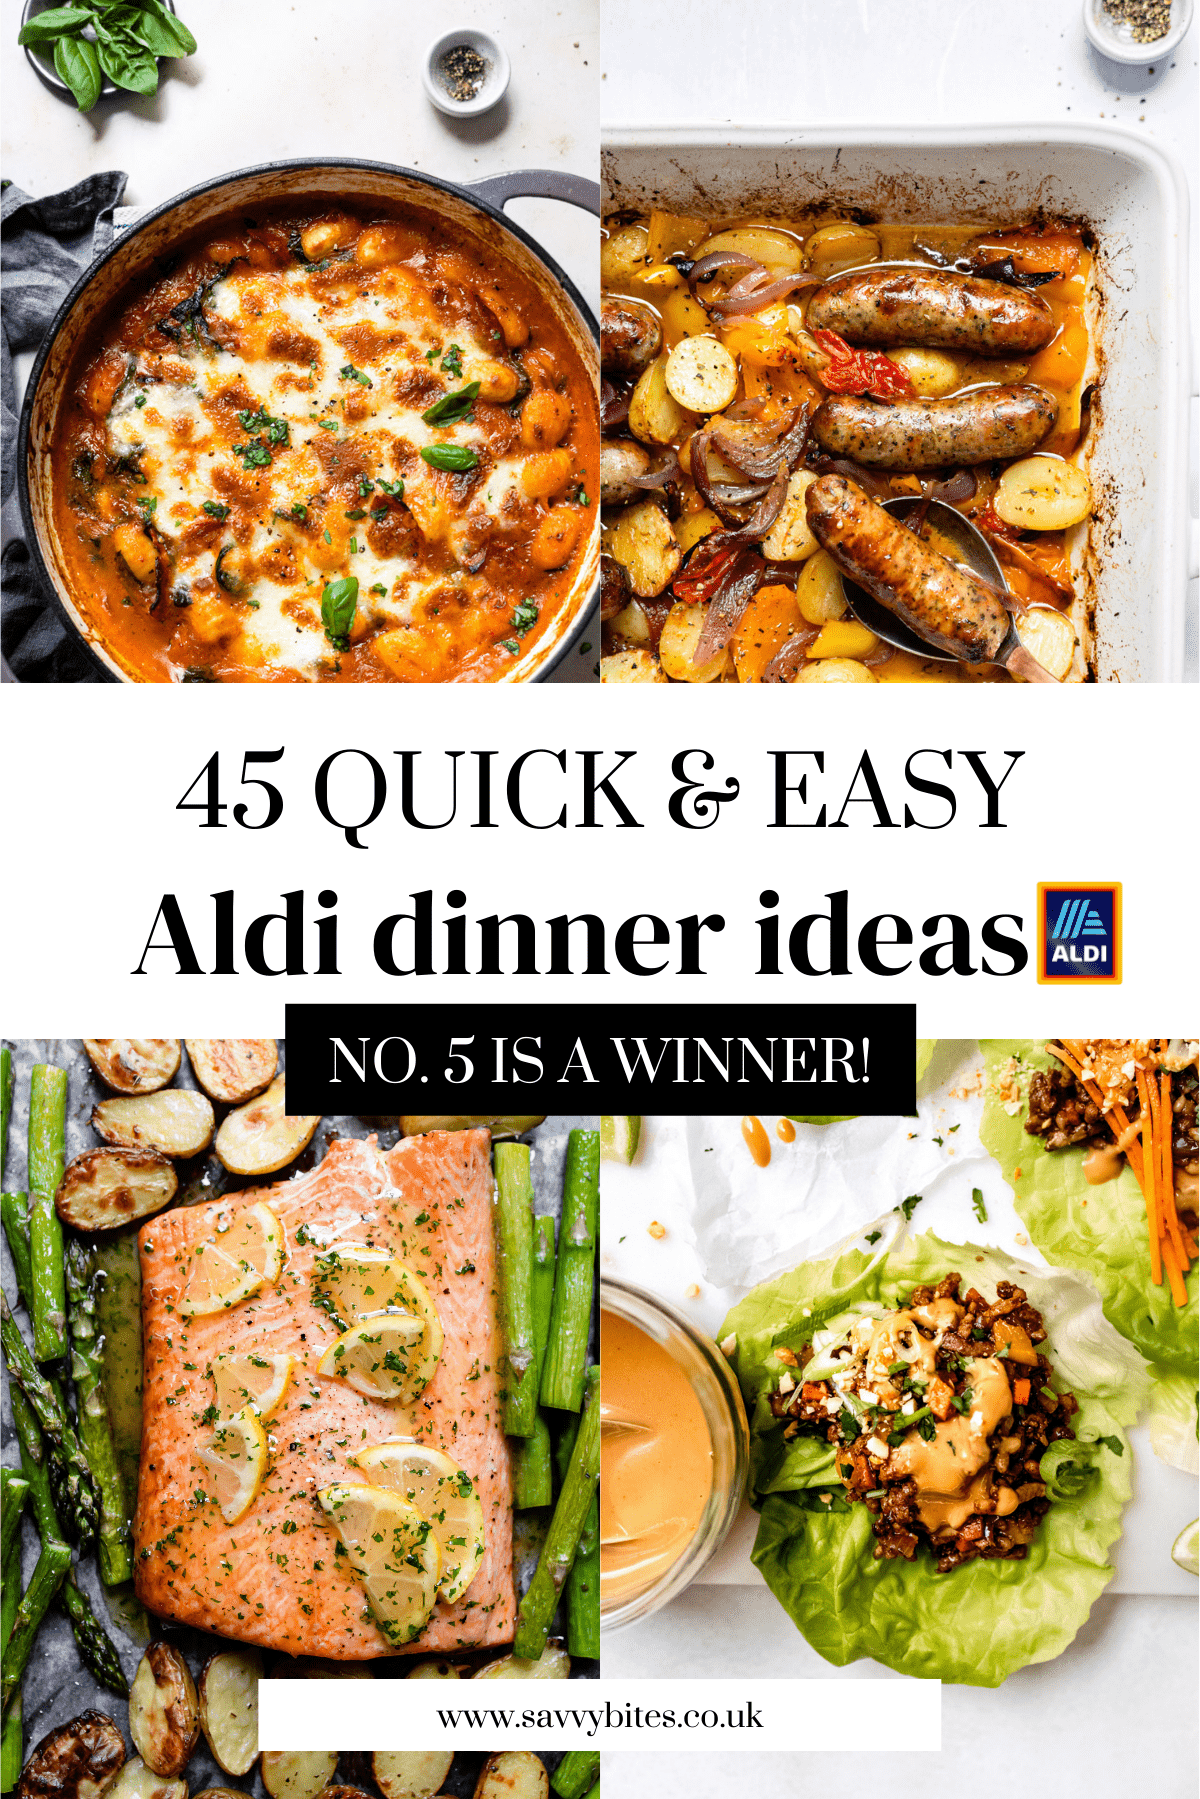 45 Aldi dinner ideas blog post collage with text overlay